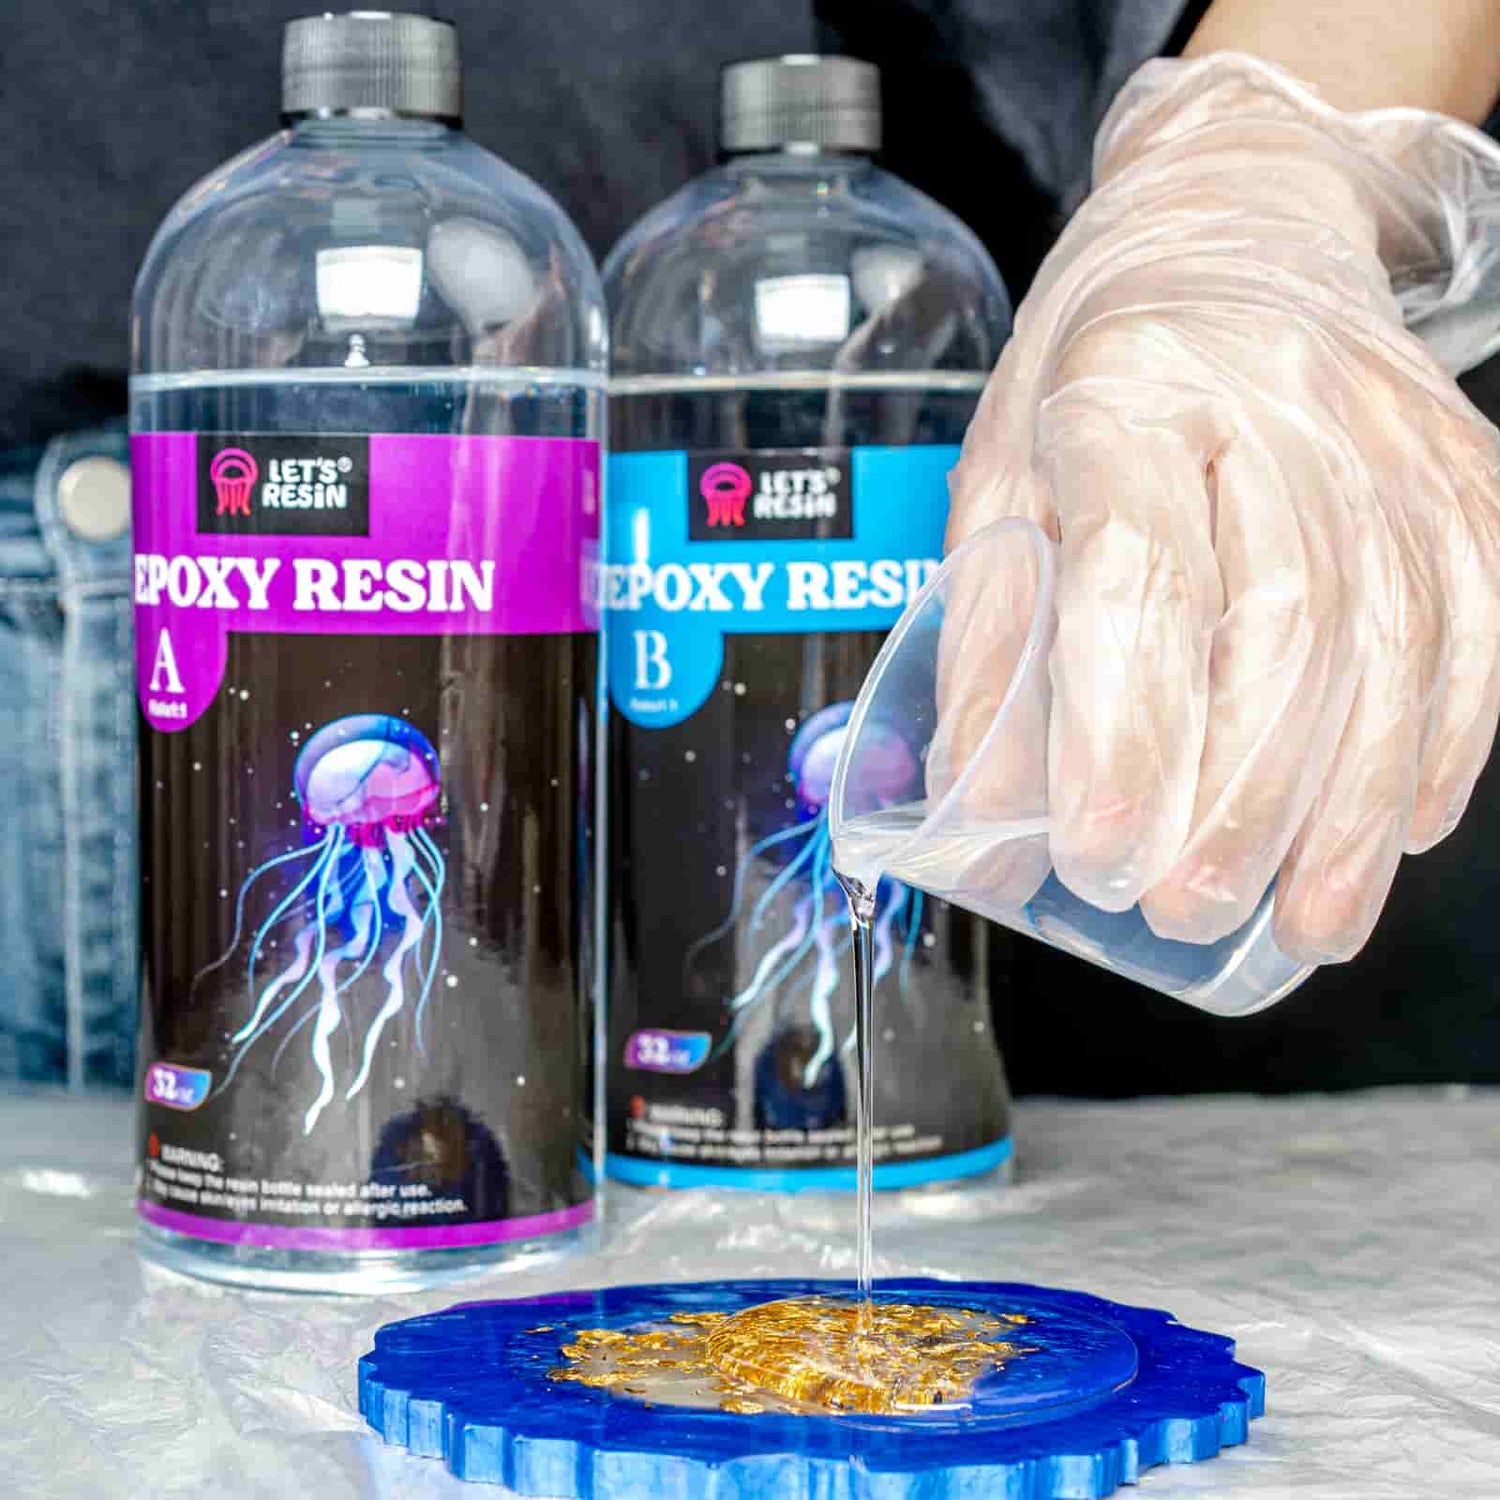 LET'S RESIN Epoxy Resin, 2 Gallon Epoxy Resin Supplies,Bubble Free &  Crystal Clear Casting Resin,Fast Curing Resin for Table Top, Countertop,  River Table, Wood, Jewelry Making,Art,Craft - Yahoo Shopping